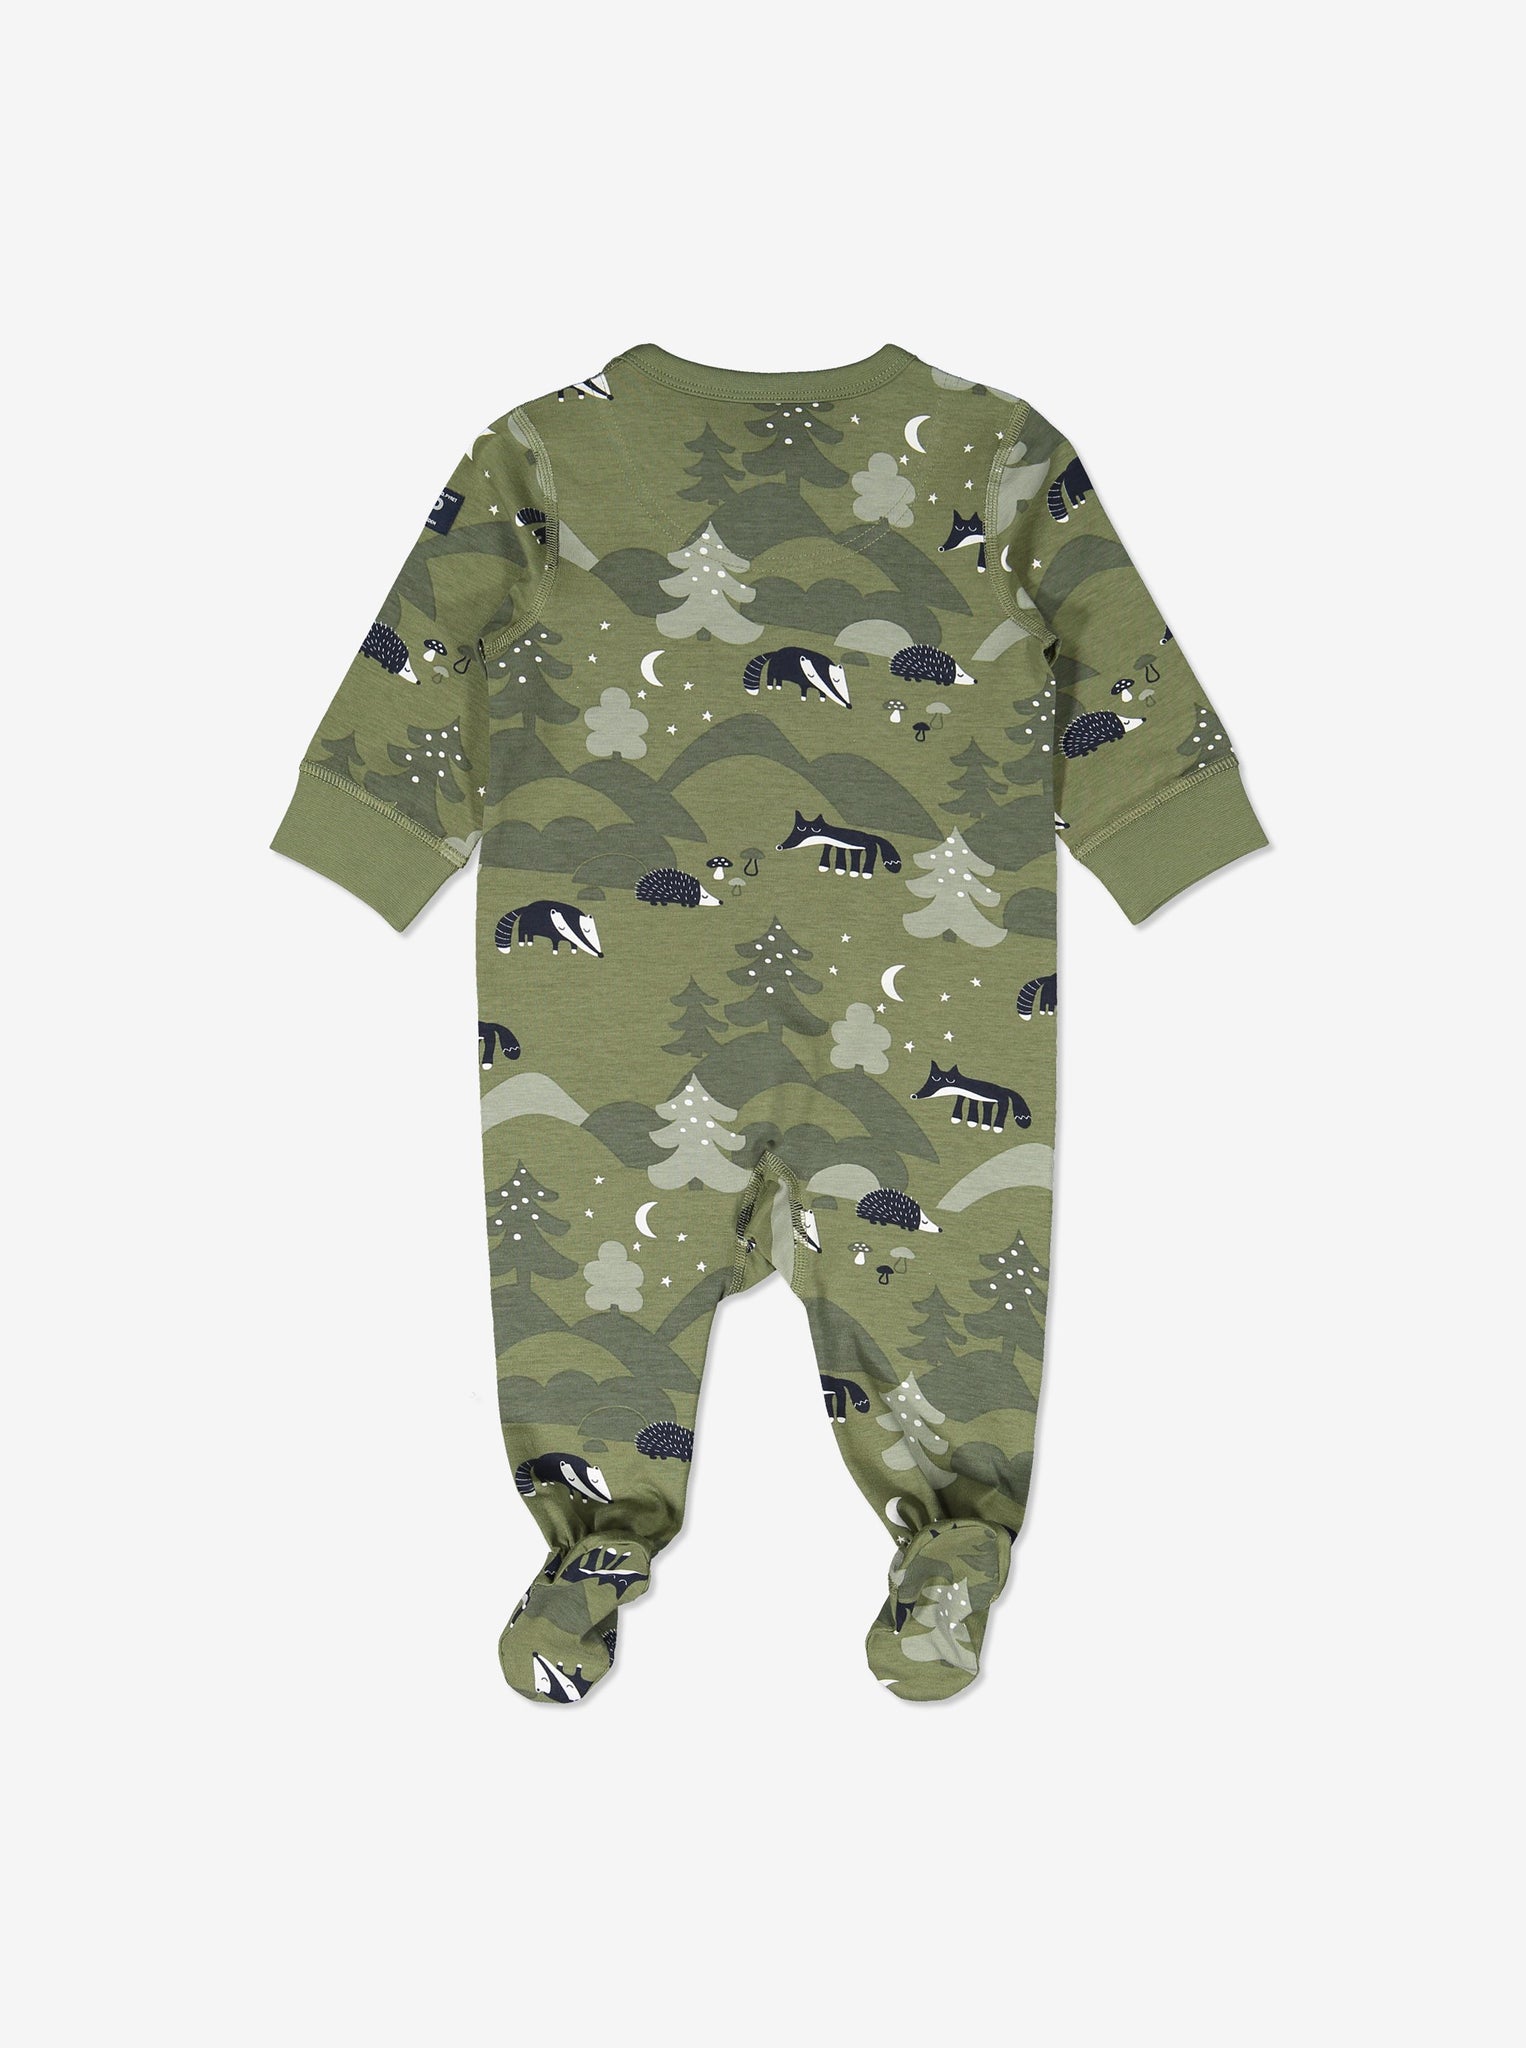 Green Organic Baby Sleepsuits, Ethical Baby Clothes | Polarn O. Pyret UK